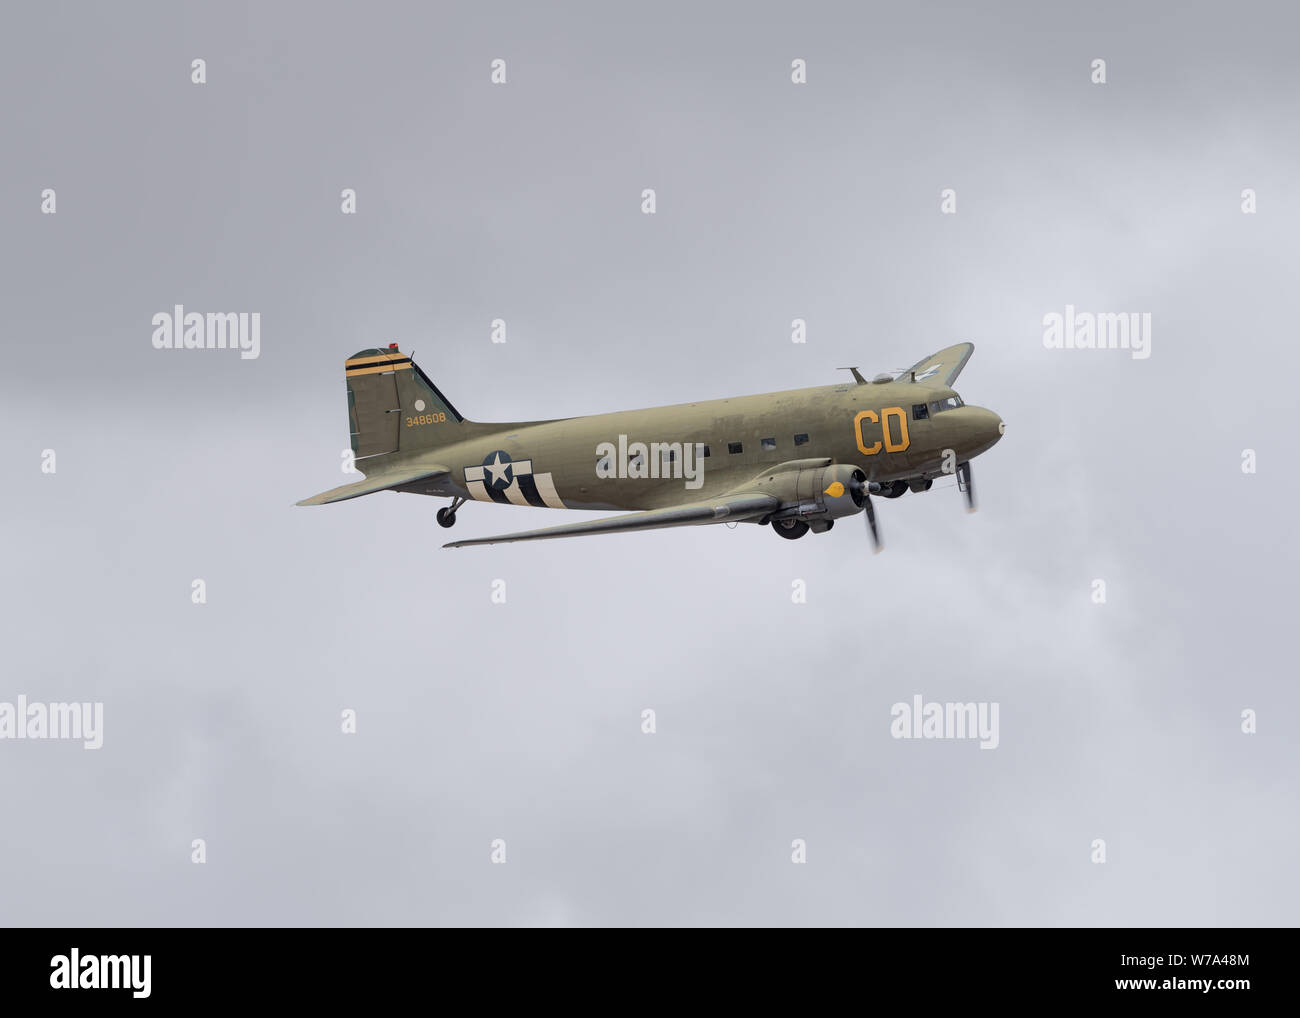 Image of Douglas C-47 Skytrain 'Betsy's Biscuit Bomber' shown flying low over the Chino Airport in Southern California. Stock Photo